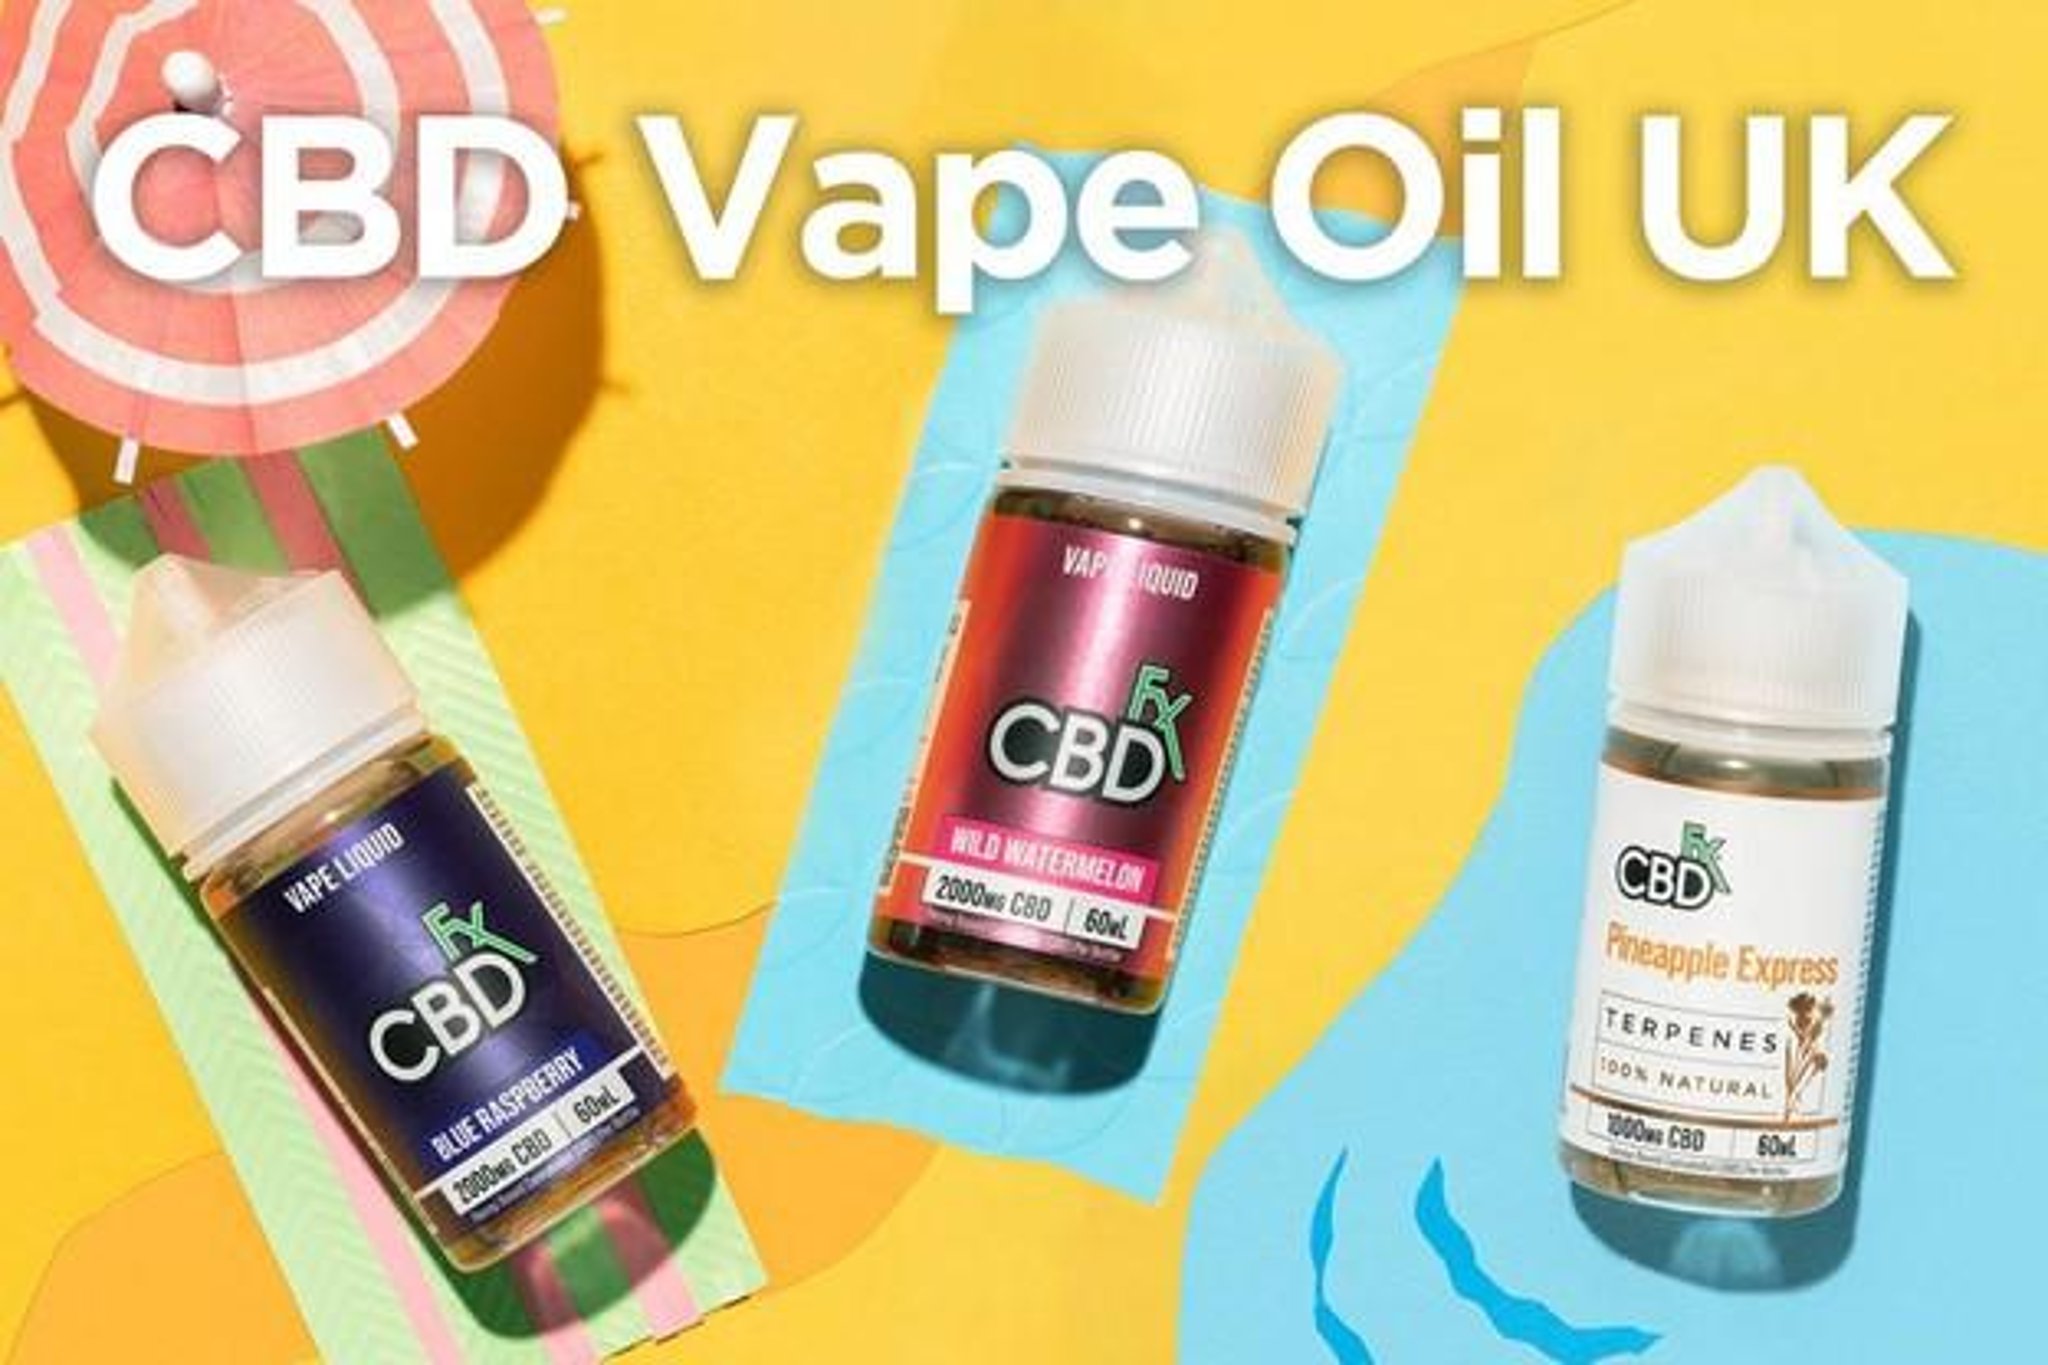 A guide to CBD vape oil and the top CBD vaping products in the UK